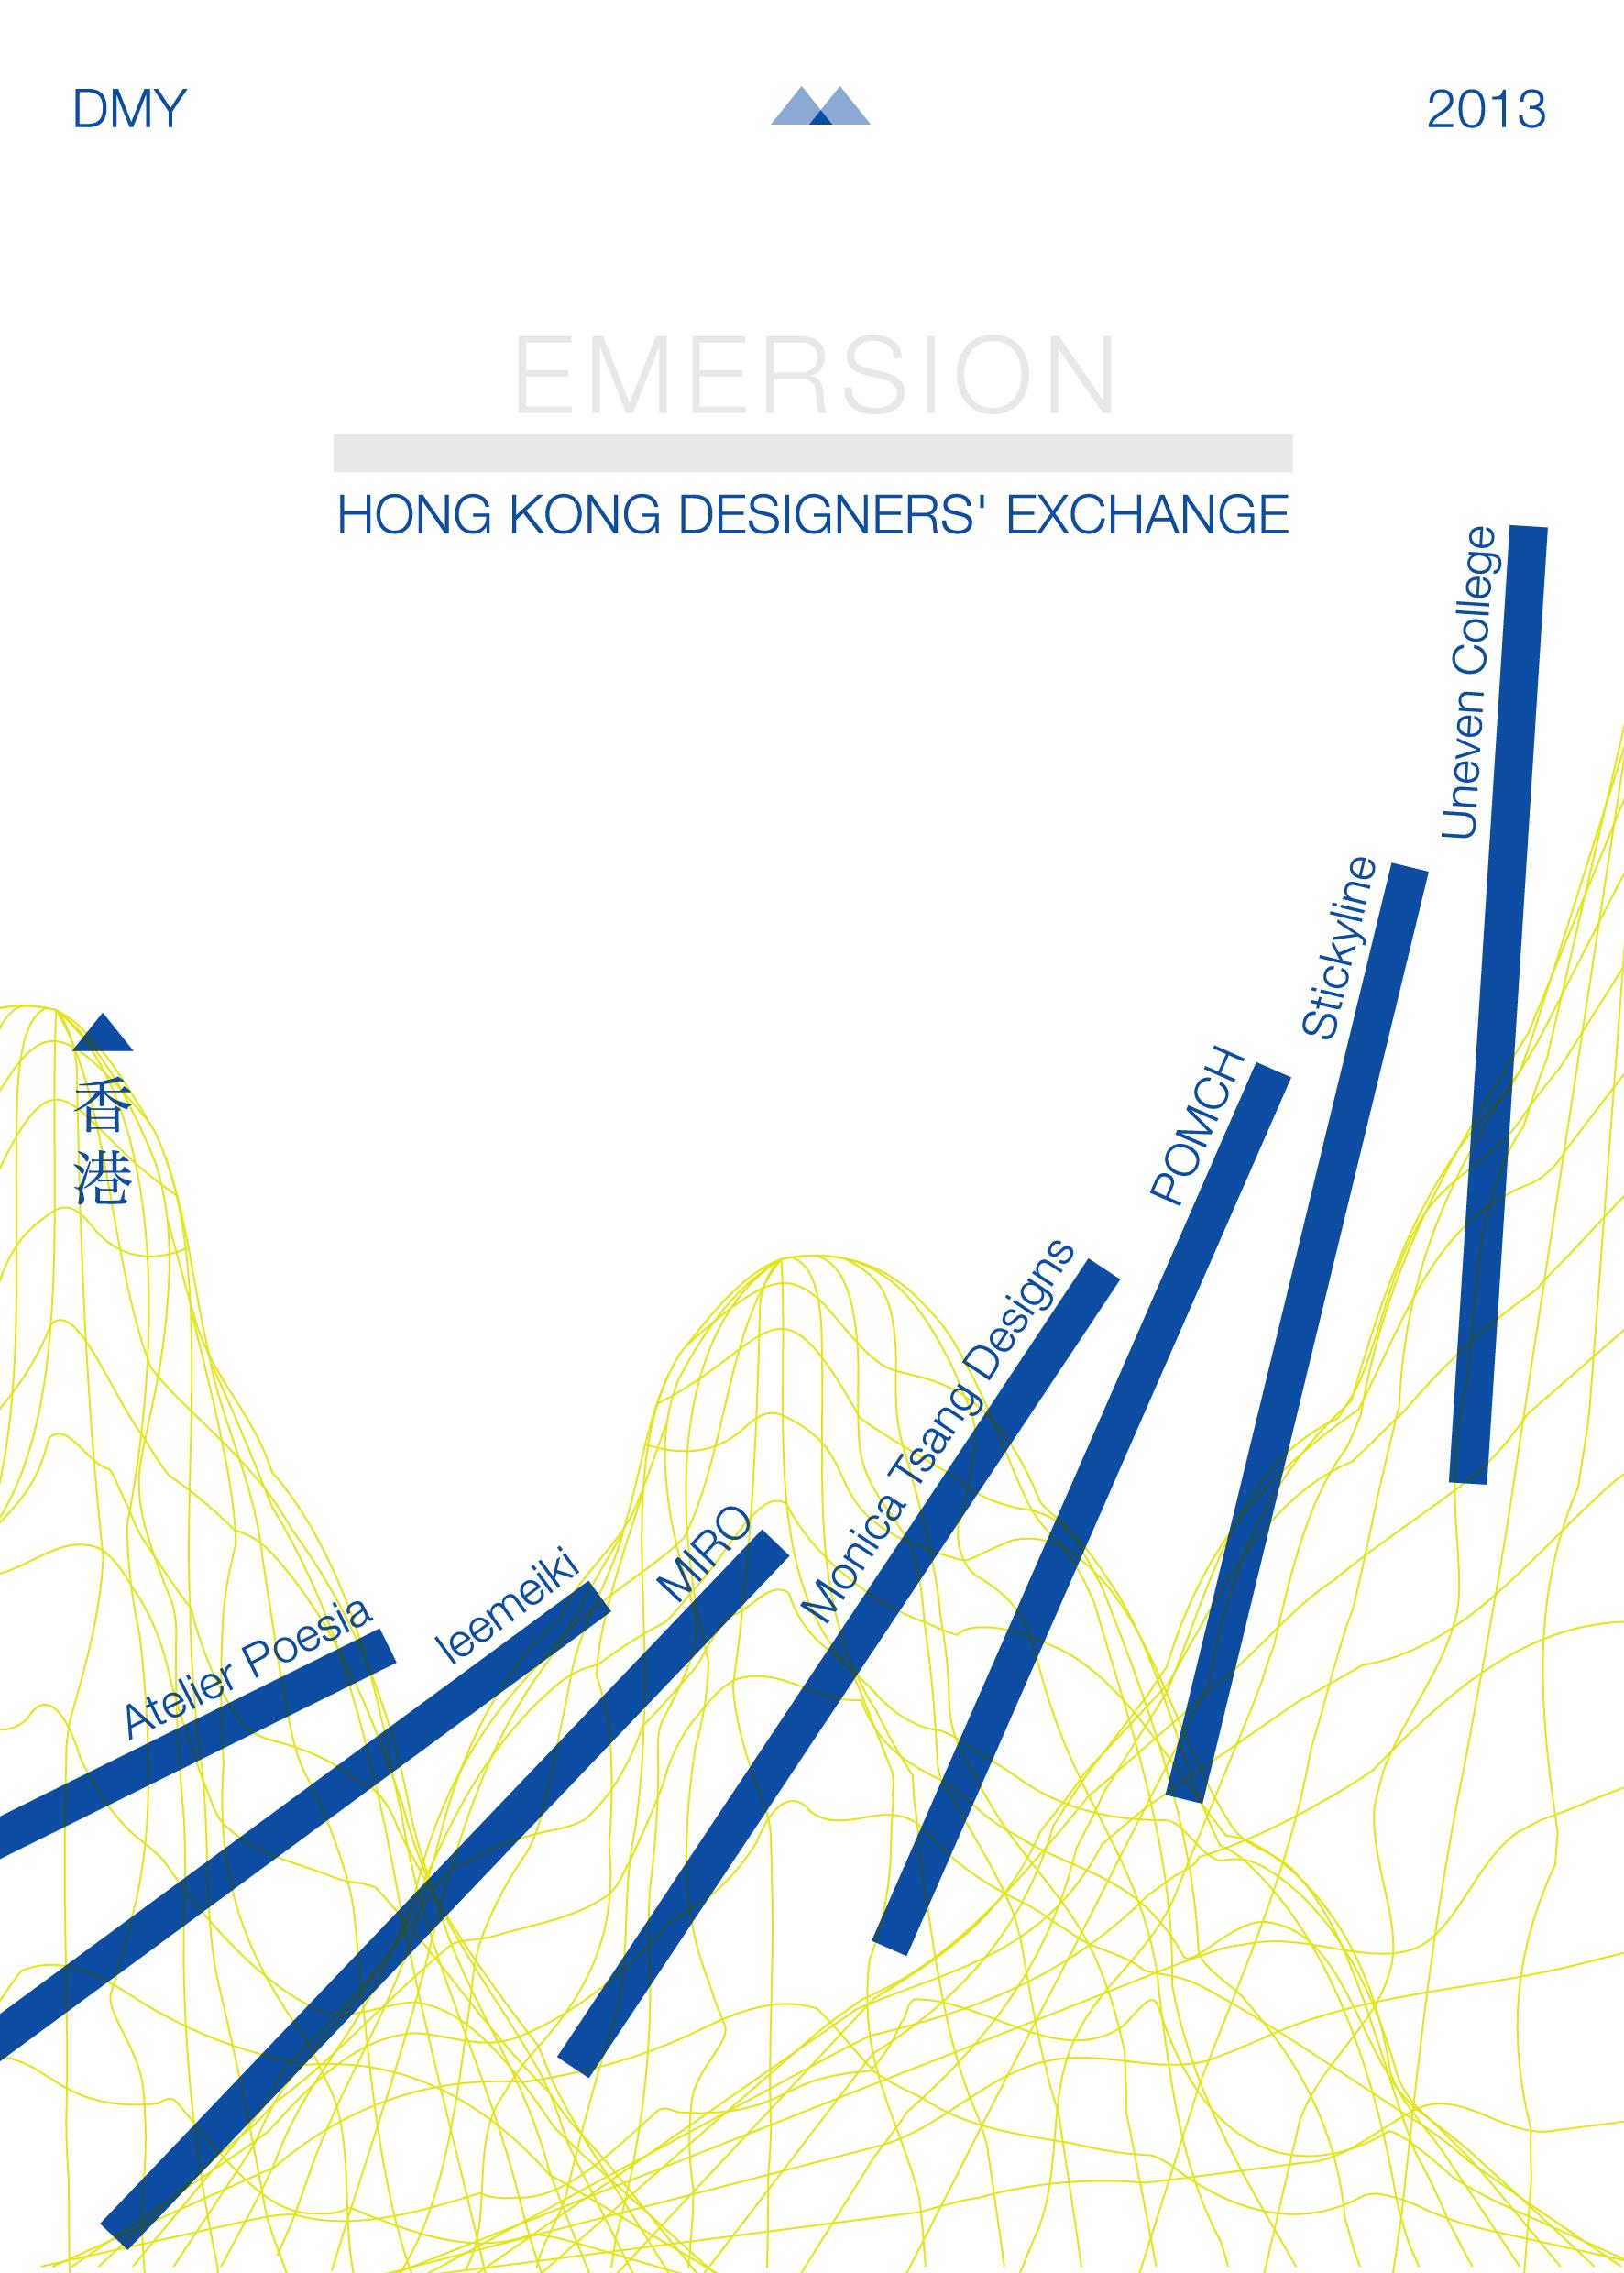 Hong Kong Berlin Designers Exchange 2013 [COMPLETED] (Project website is no longer available)